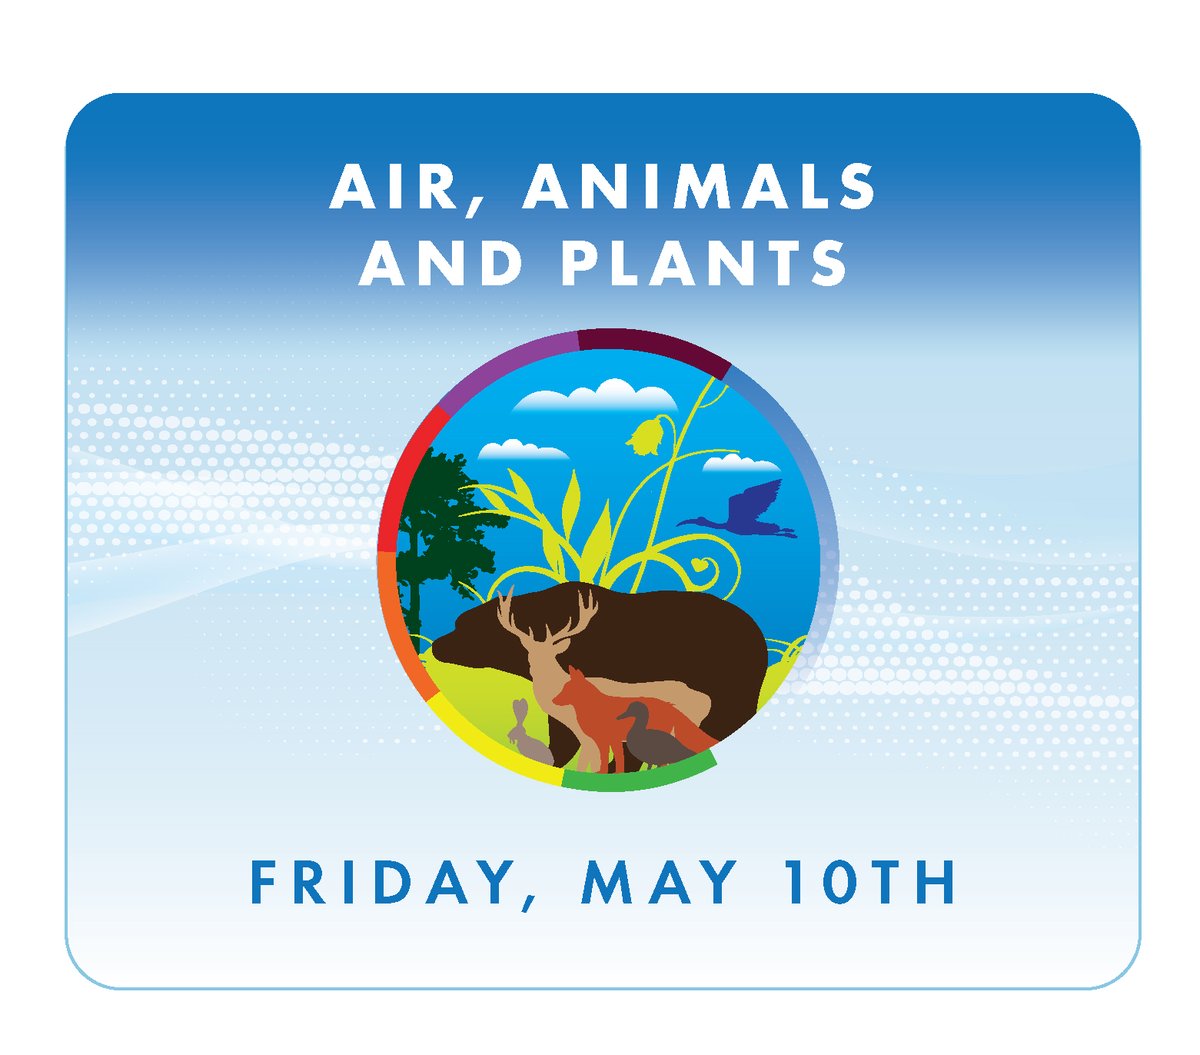 Air pollution impacts animals and plants directly through the air and indirectly through the water and soil. Learn how air pollution impacts our ecosystems and what's being done to protect them: epa.gov/air-quality/ai… #cantonhealth #AirAnimalsAndPlants #AQAW2024